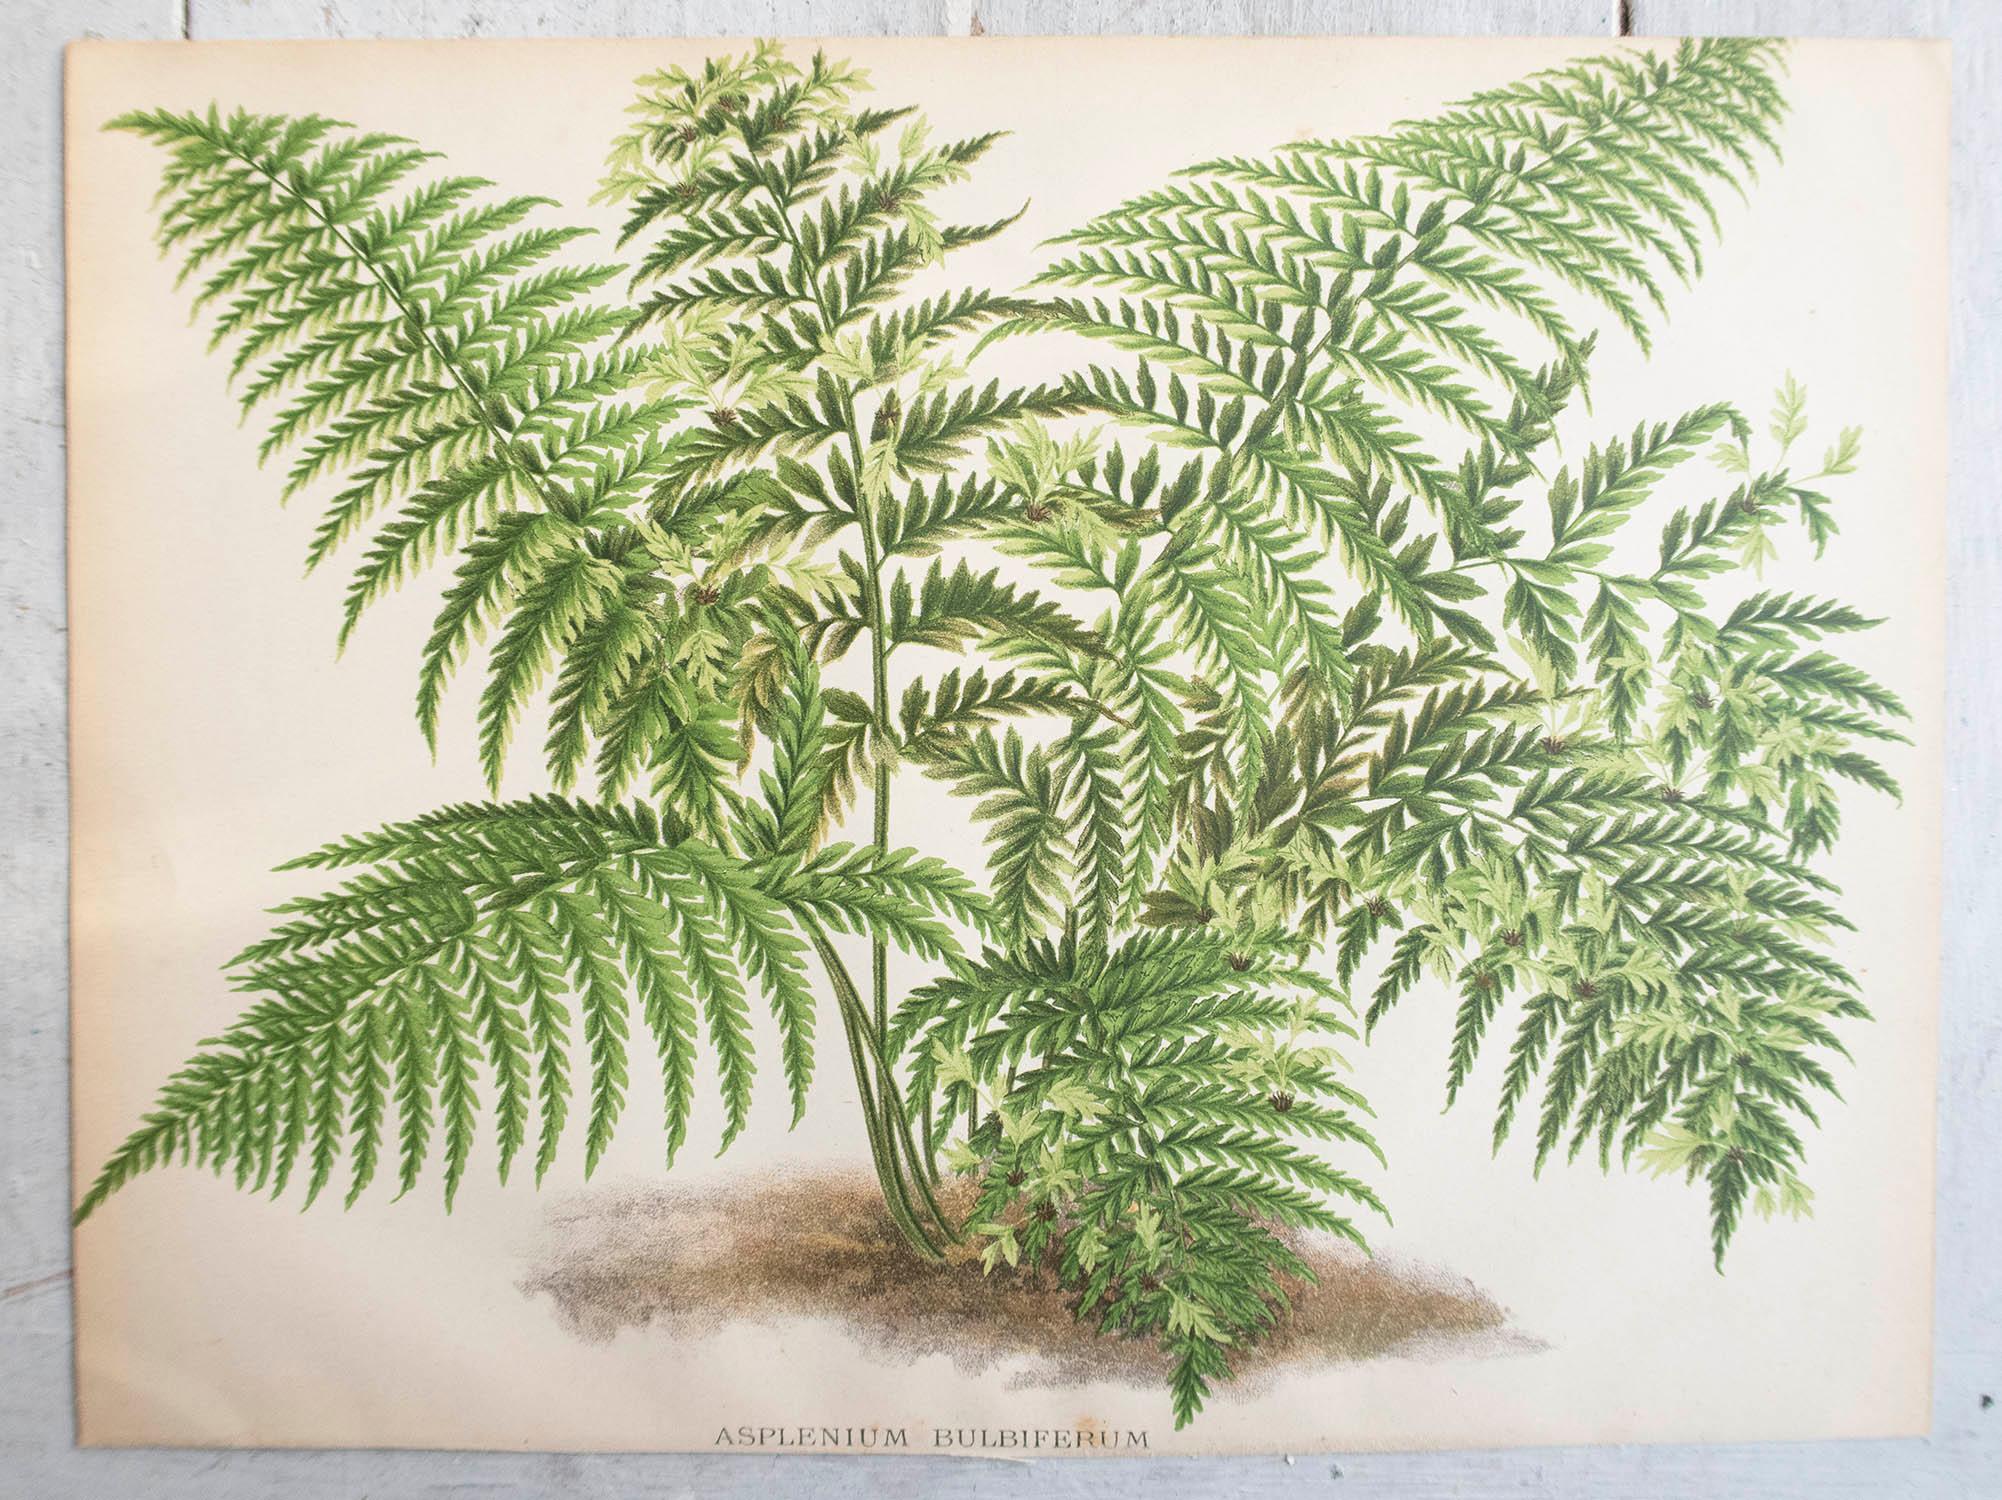 Wonderful set of 3 fern prints

Chromo-lithographs

Original color

Published, circa 1870

Unframed.

The measurement given is for one print.

Free shipping

